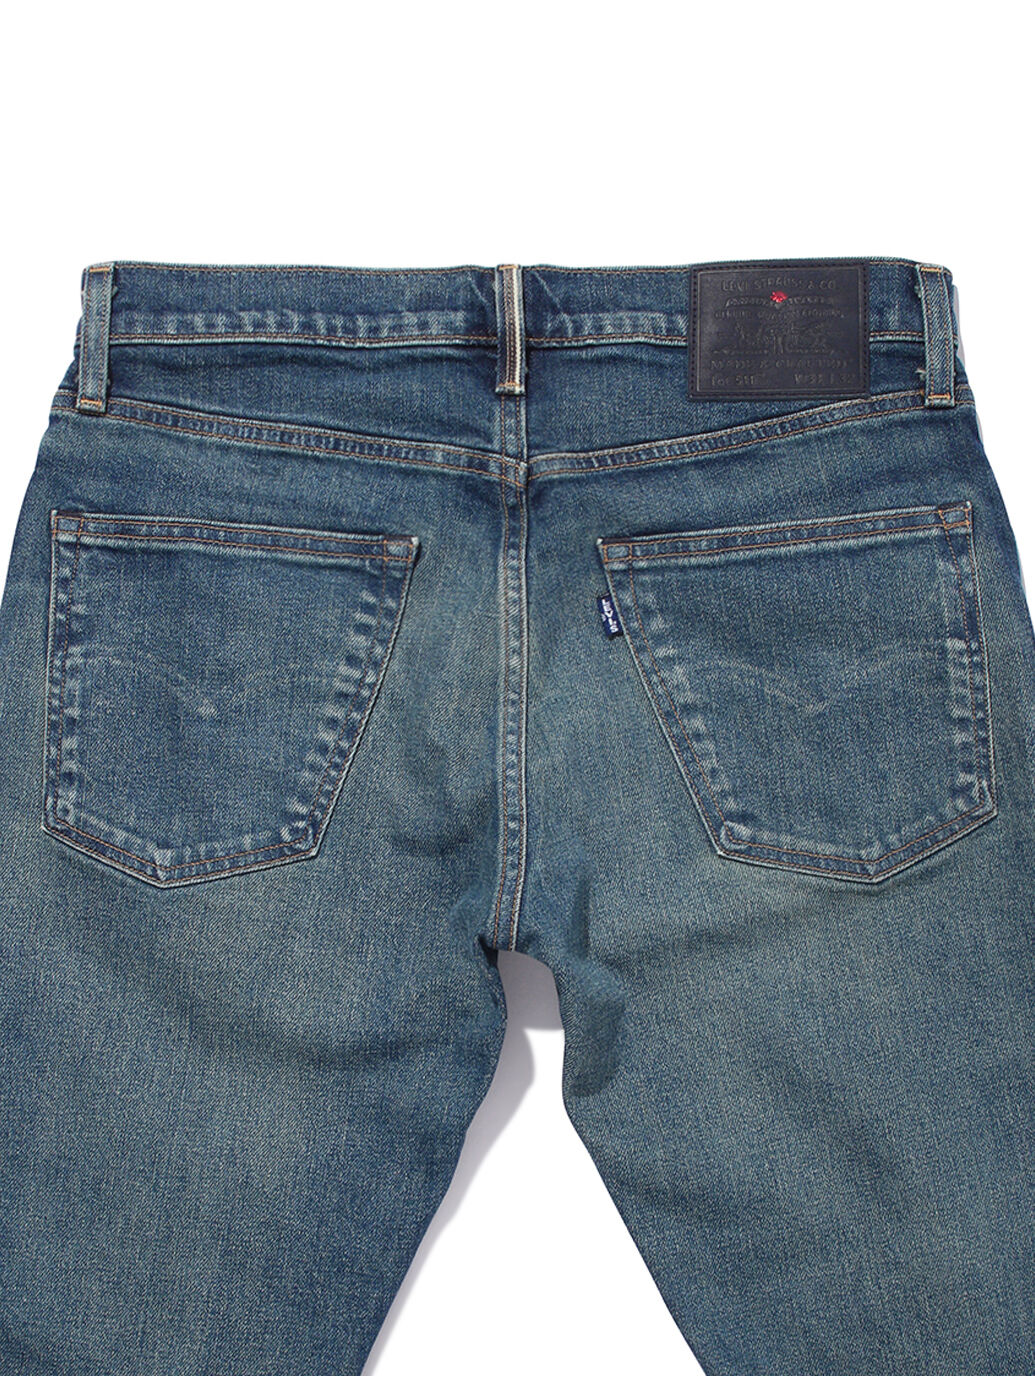 LEVI'S® MADE&CRAFTED®511™ KAIYŌ MADE IN JAPAN｜リーバイス® 公式通販